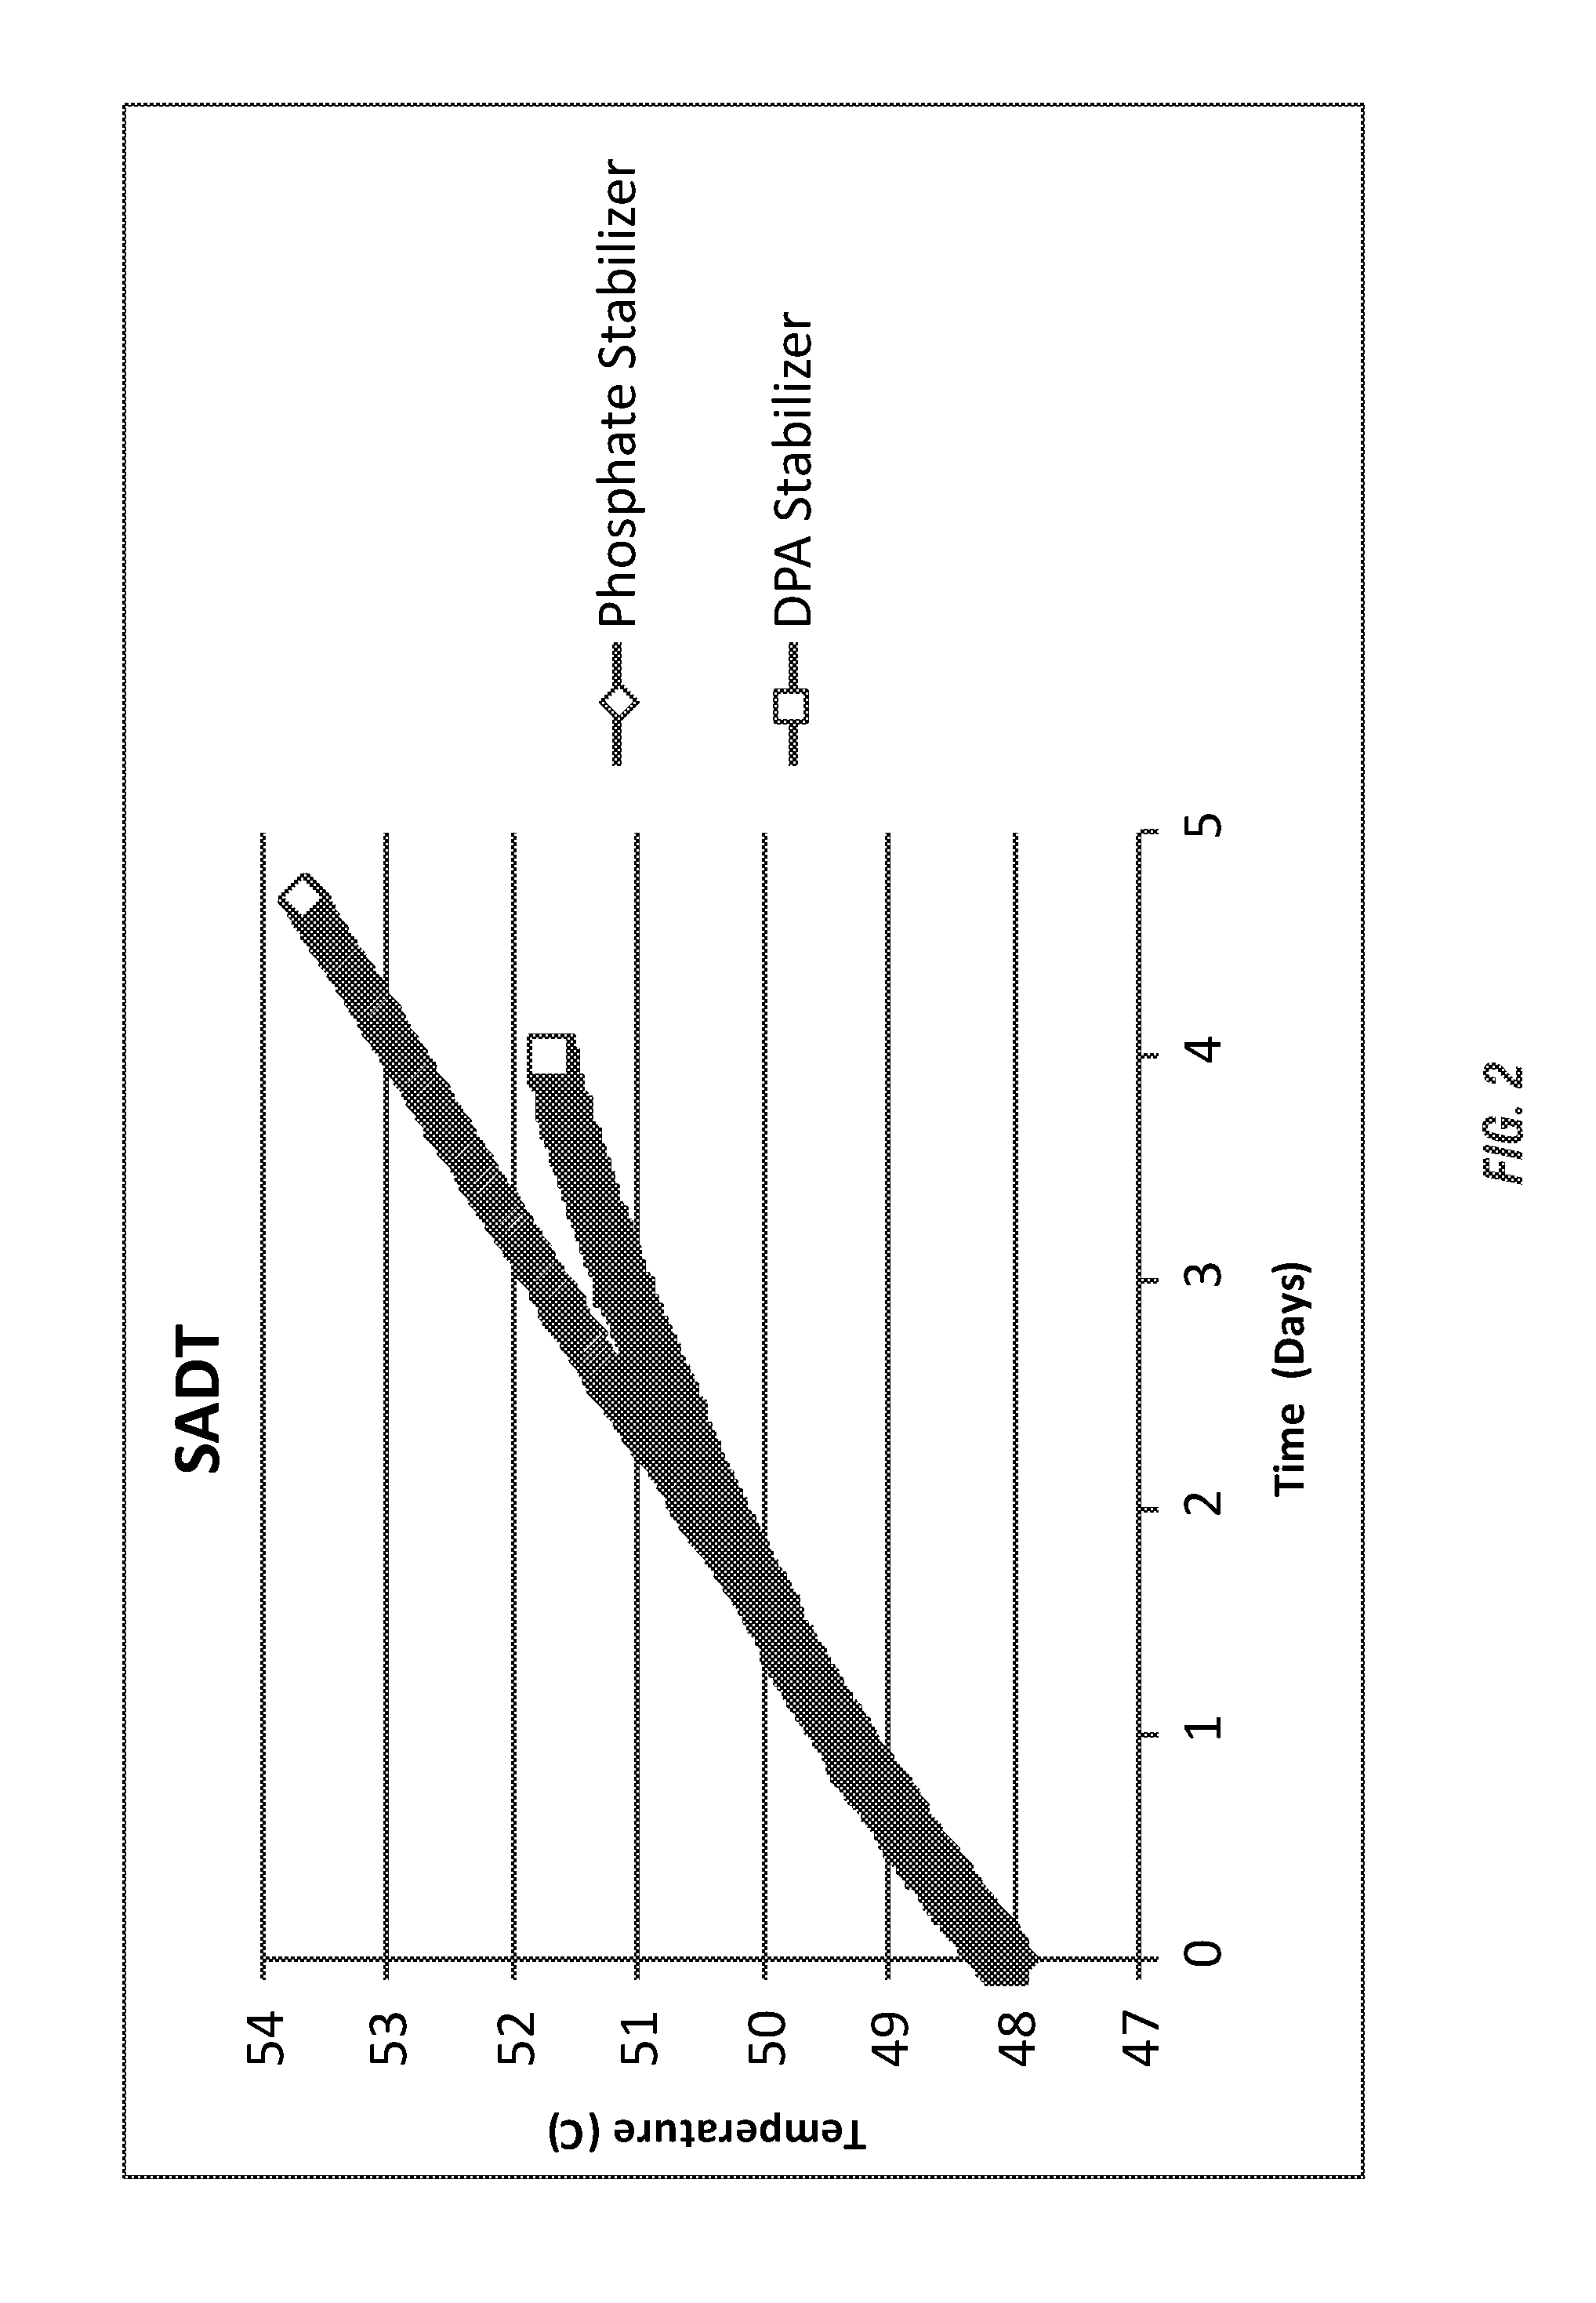 Efficient stabilizer in controlling self accelerated decomposition temperature of peroxycarboxylic acid compositions with mineral acids